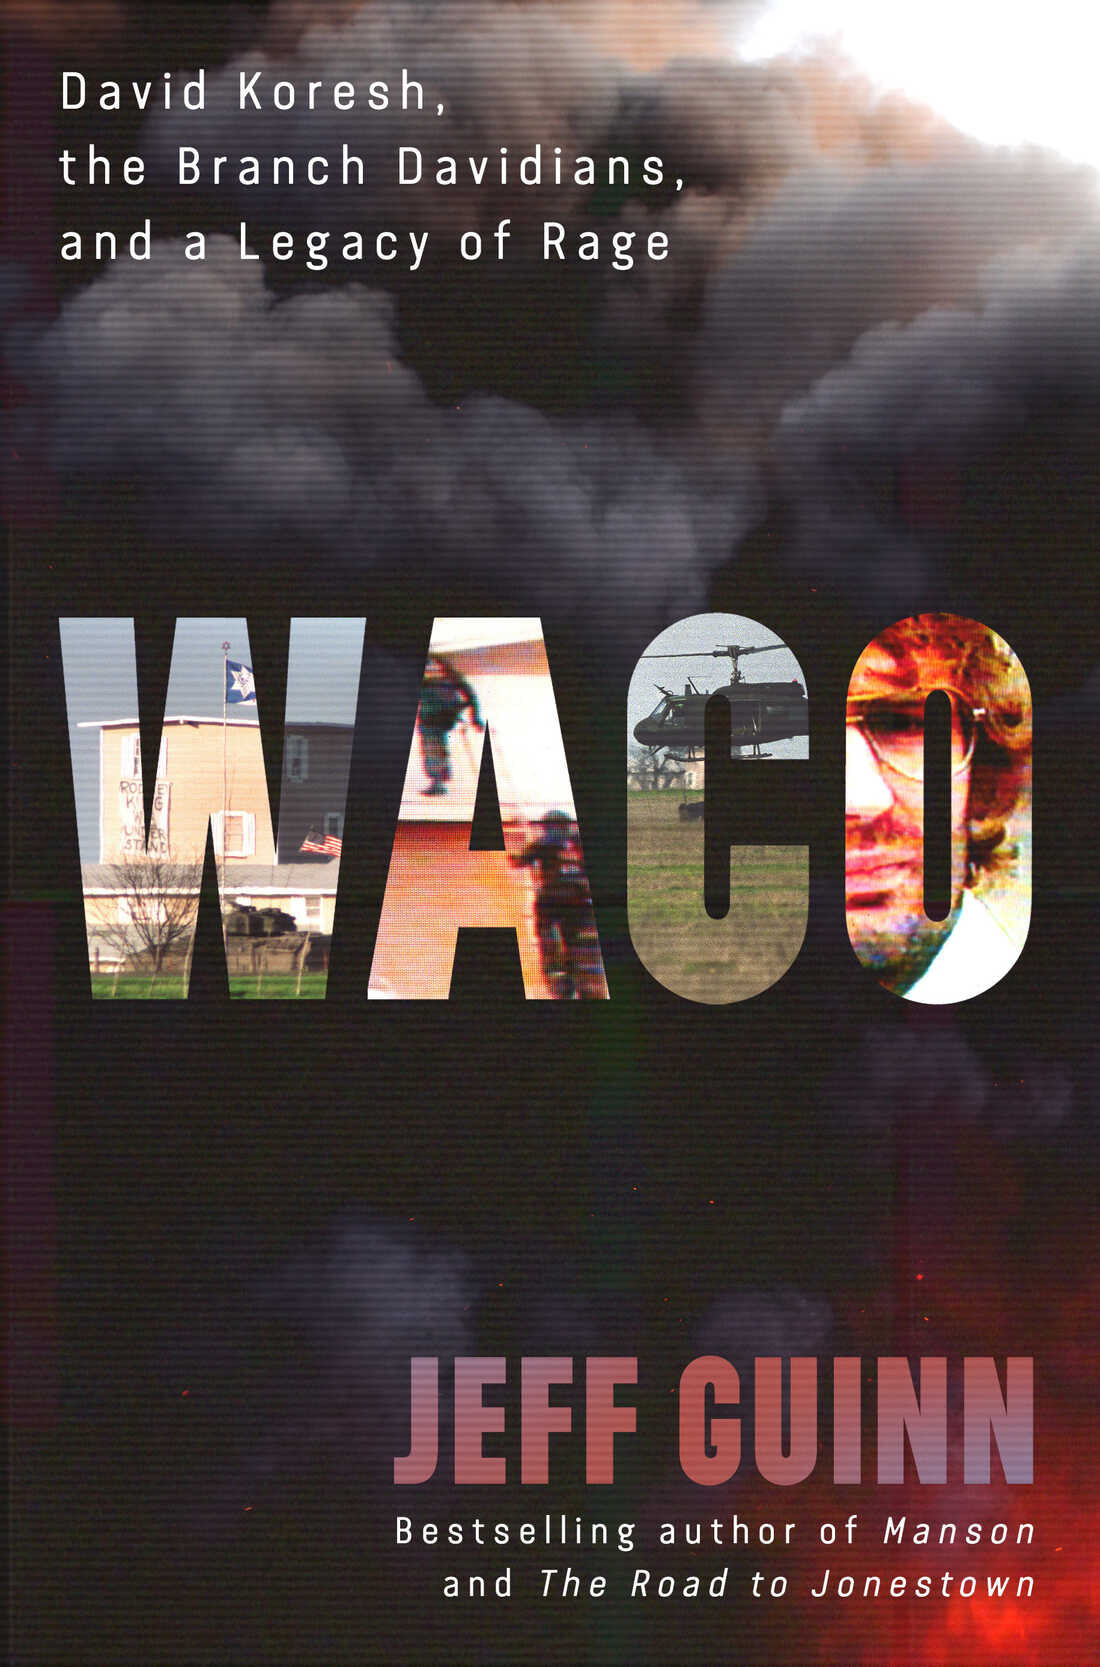 Waco: David Koresh, The Branch Davidians, and a Legacy of Rage, by Jeff Guinn